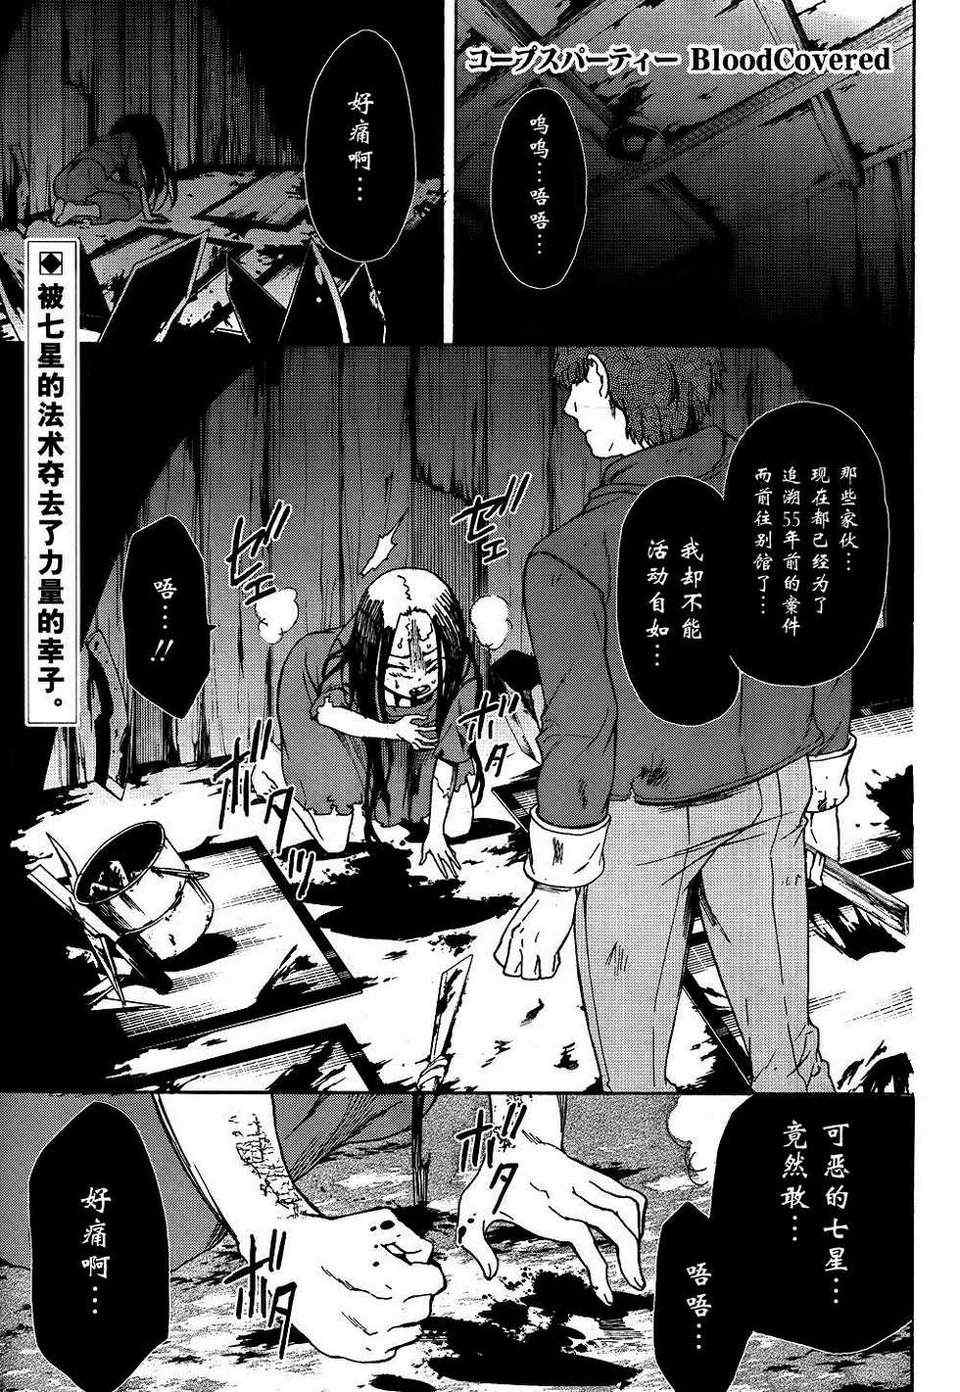 BLOOD_COVERED - 第39話 - 1